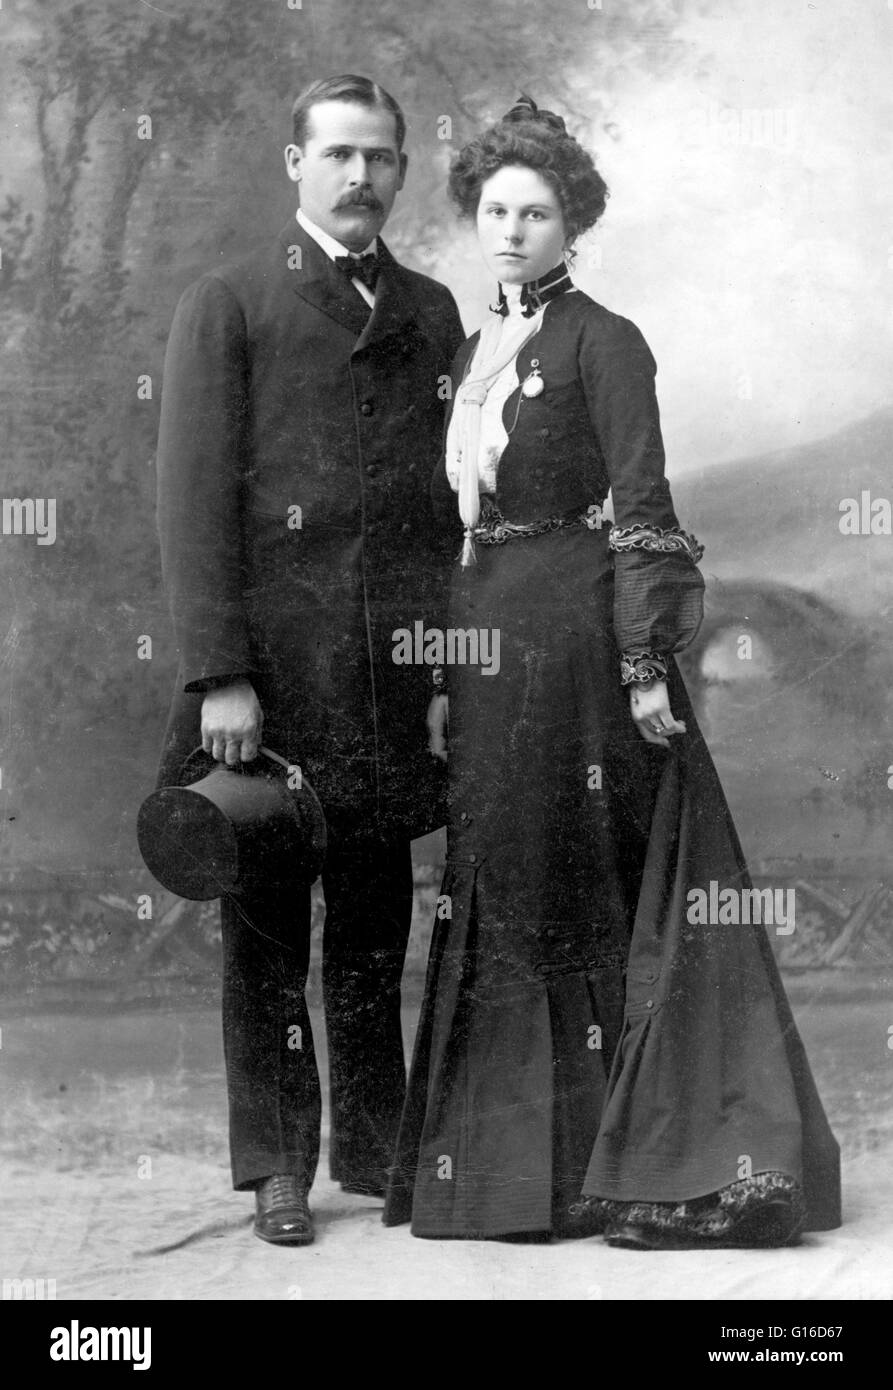 Harry Longabaugh and Etta Place photographed by De Young Photograph Studio, NYC, 1901. Harry Alonzo Longabaugh (1867 - November 7, 1908), better known as the Sundance Kid, was an outlaw and member of Butch Cassidy's Wild Bunch in the American Old West. Lo Stock Photo